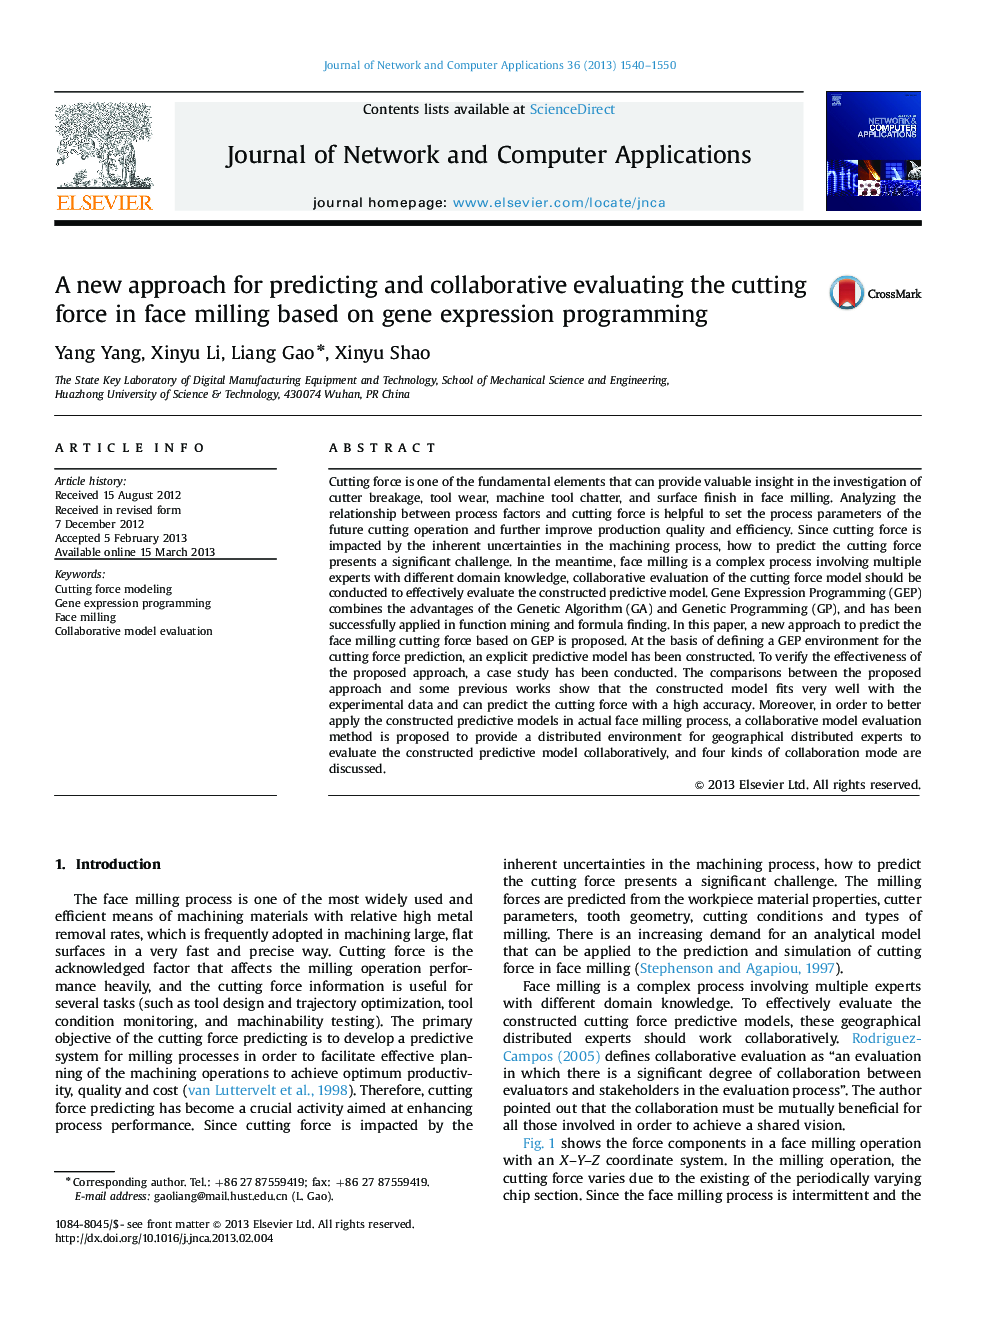 A new approach for predicting and collaborative evaluating the cutting force in face milling based on gene expression programming